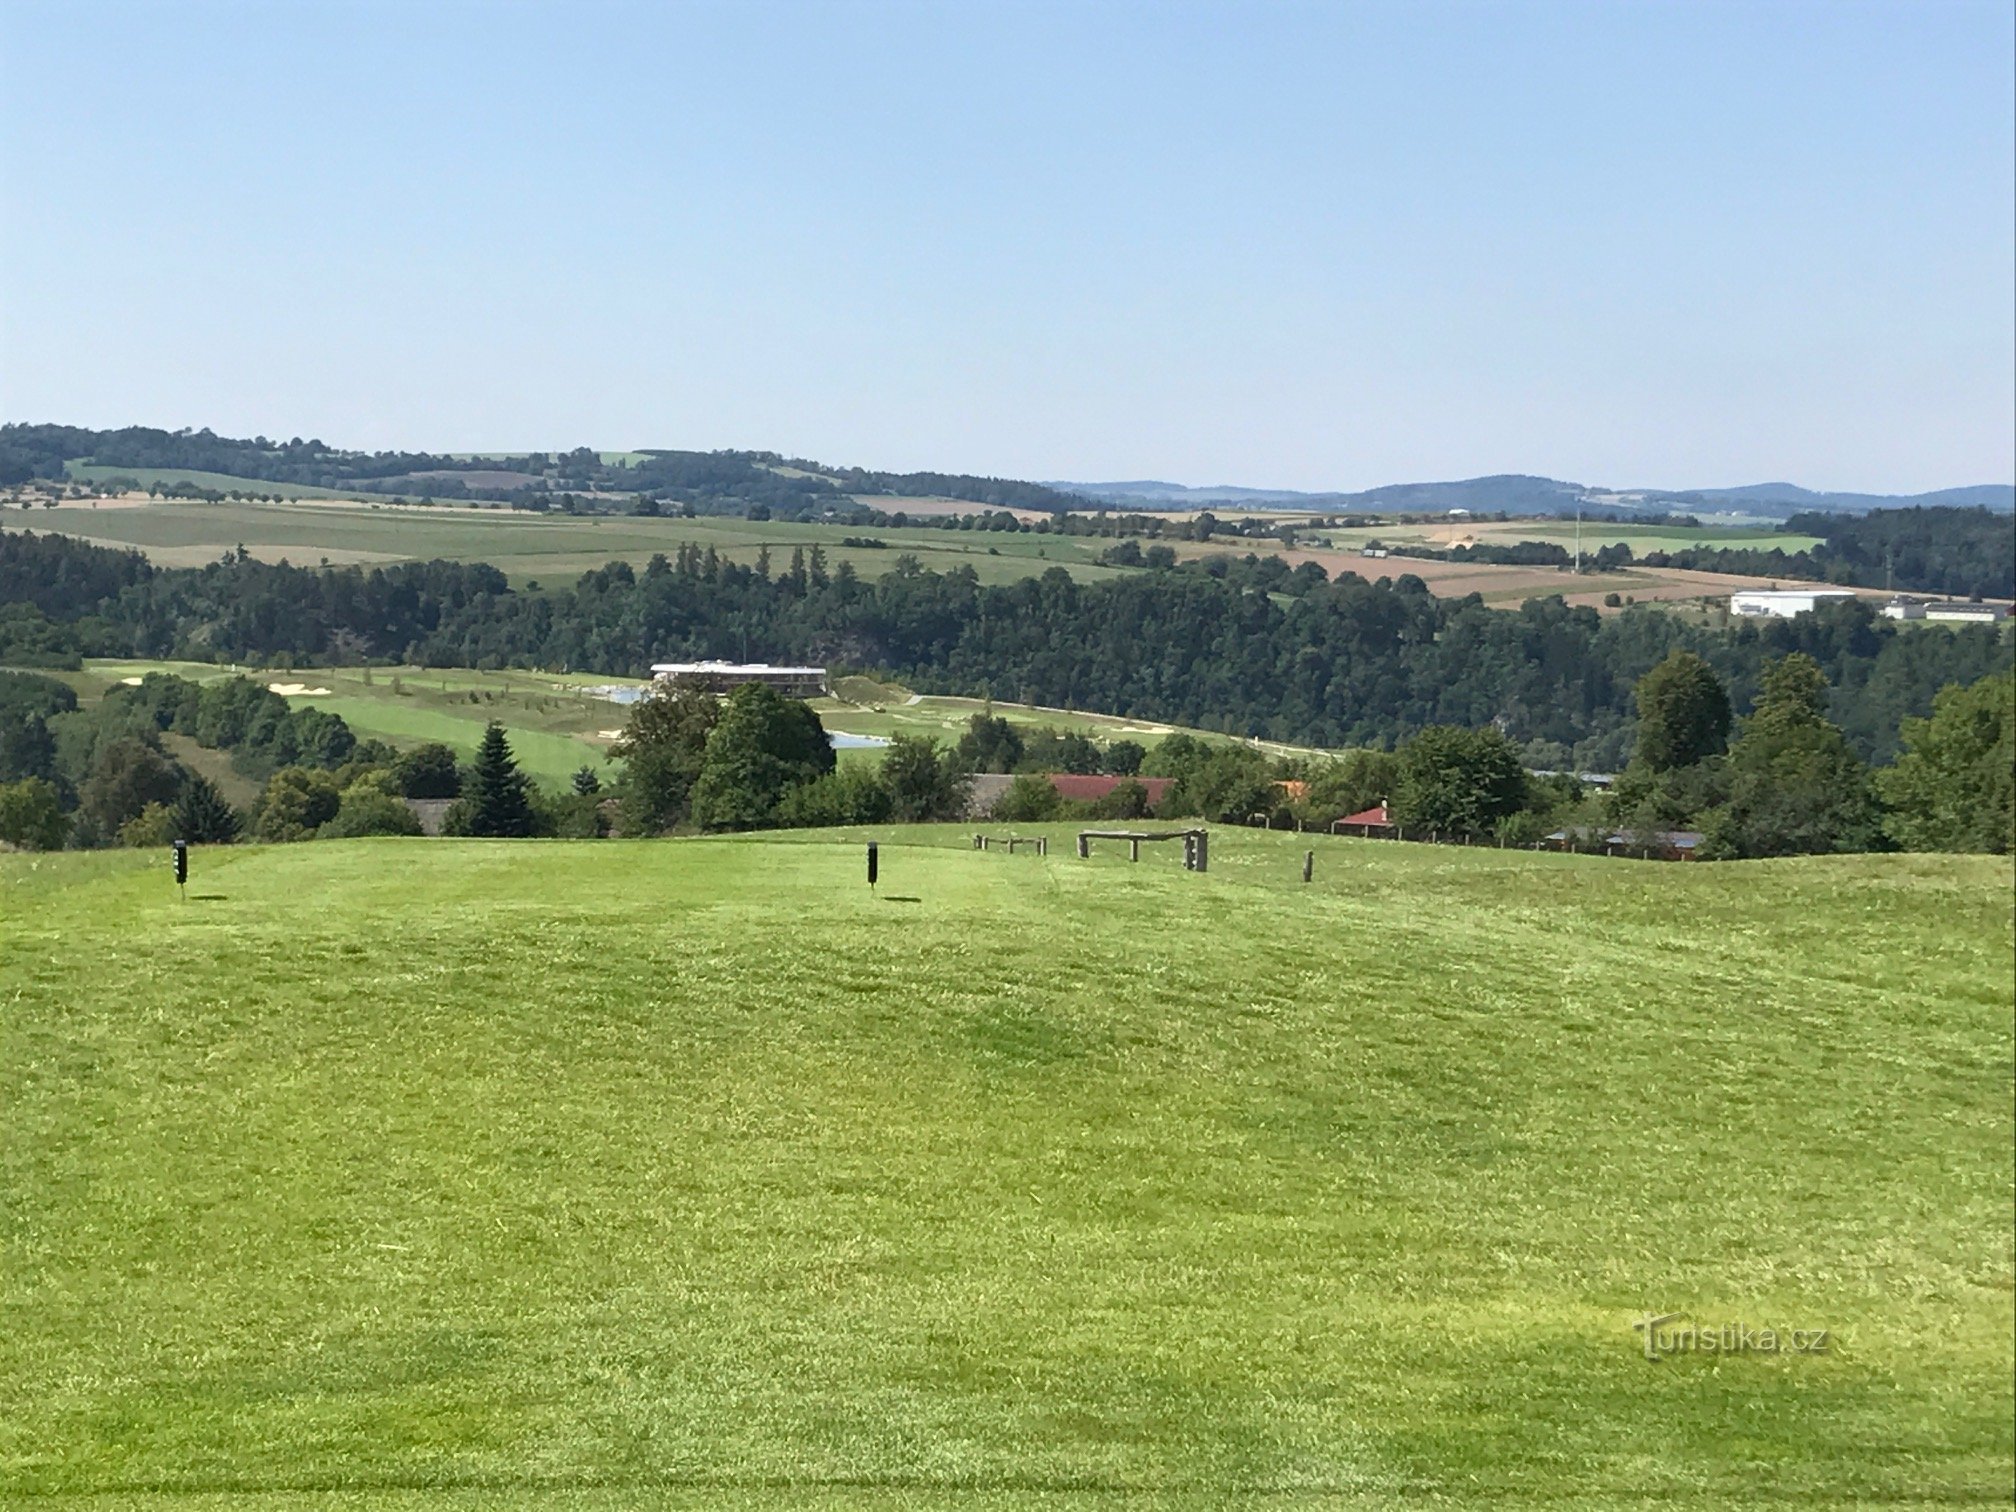 view from the tee of the 4st hole